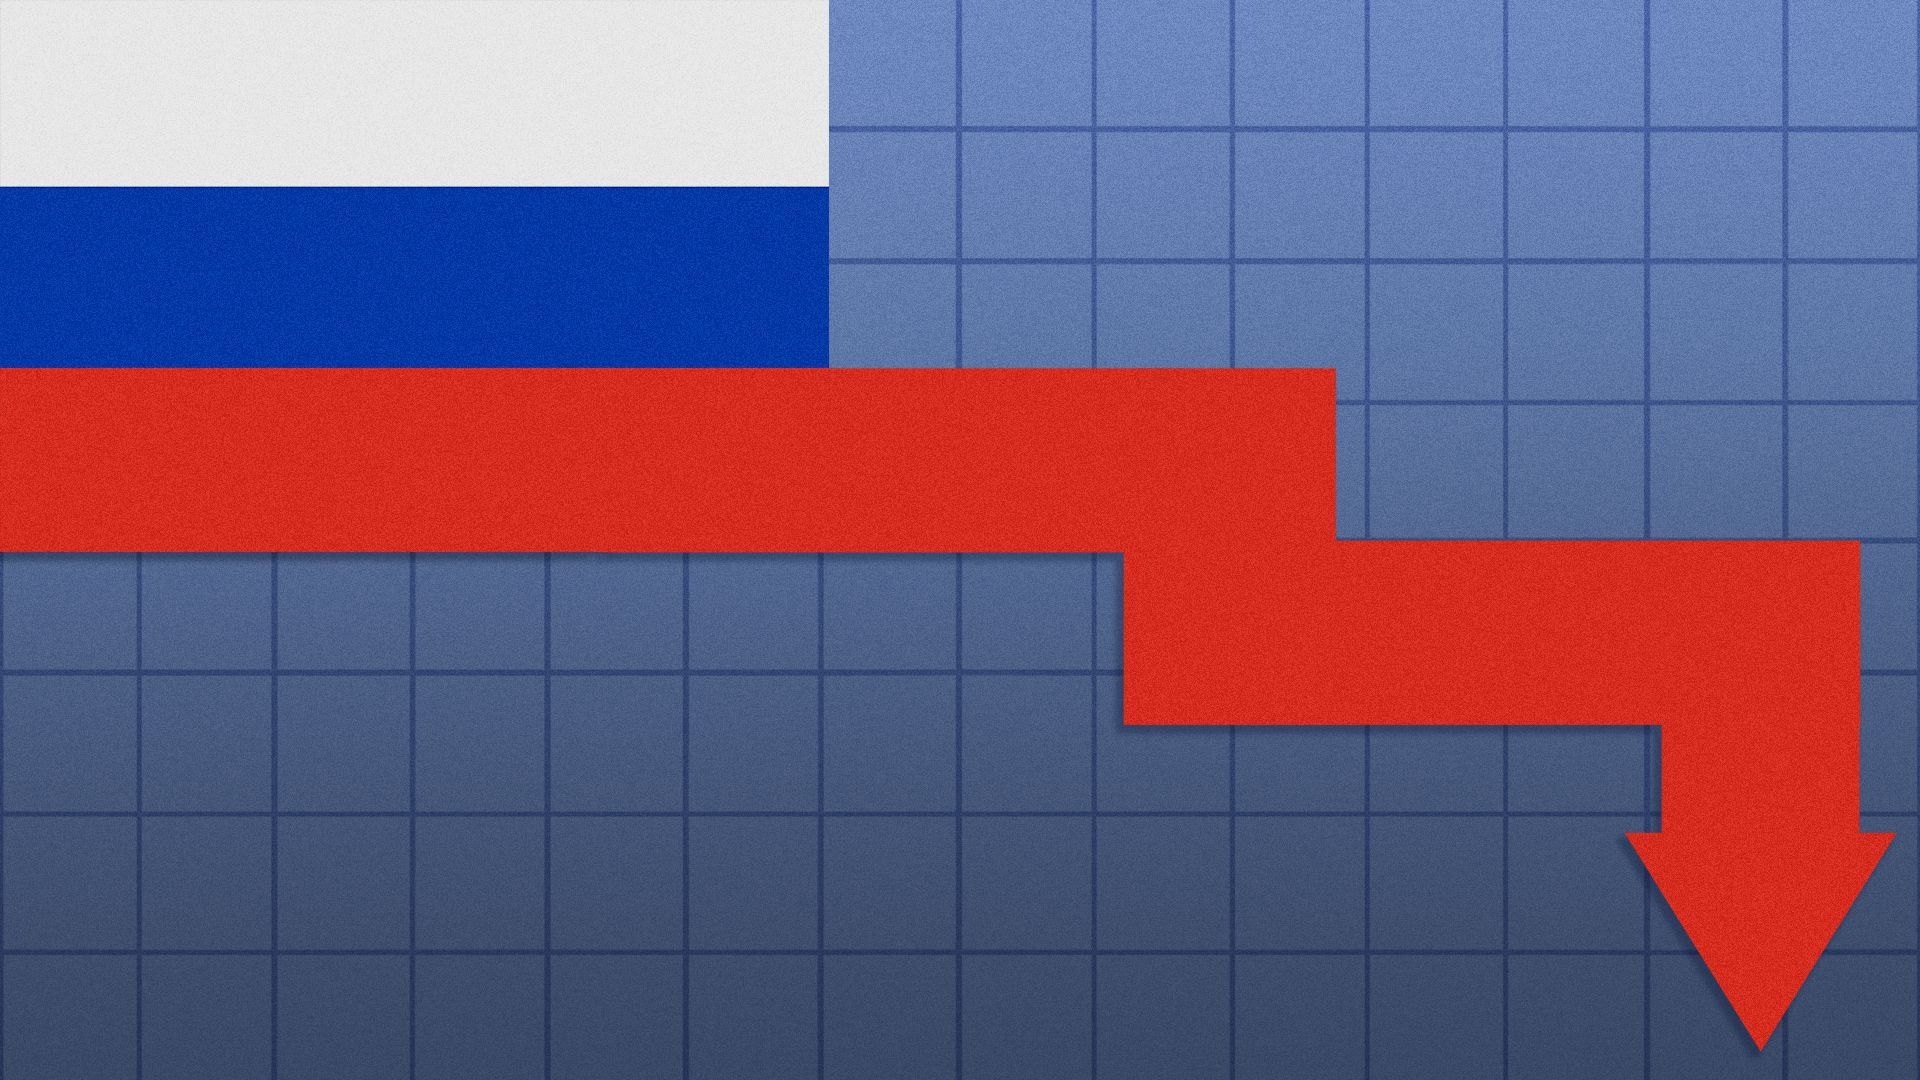 Russian flag with a downward trend arrow